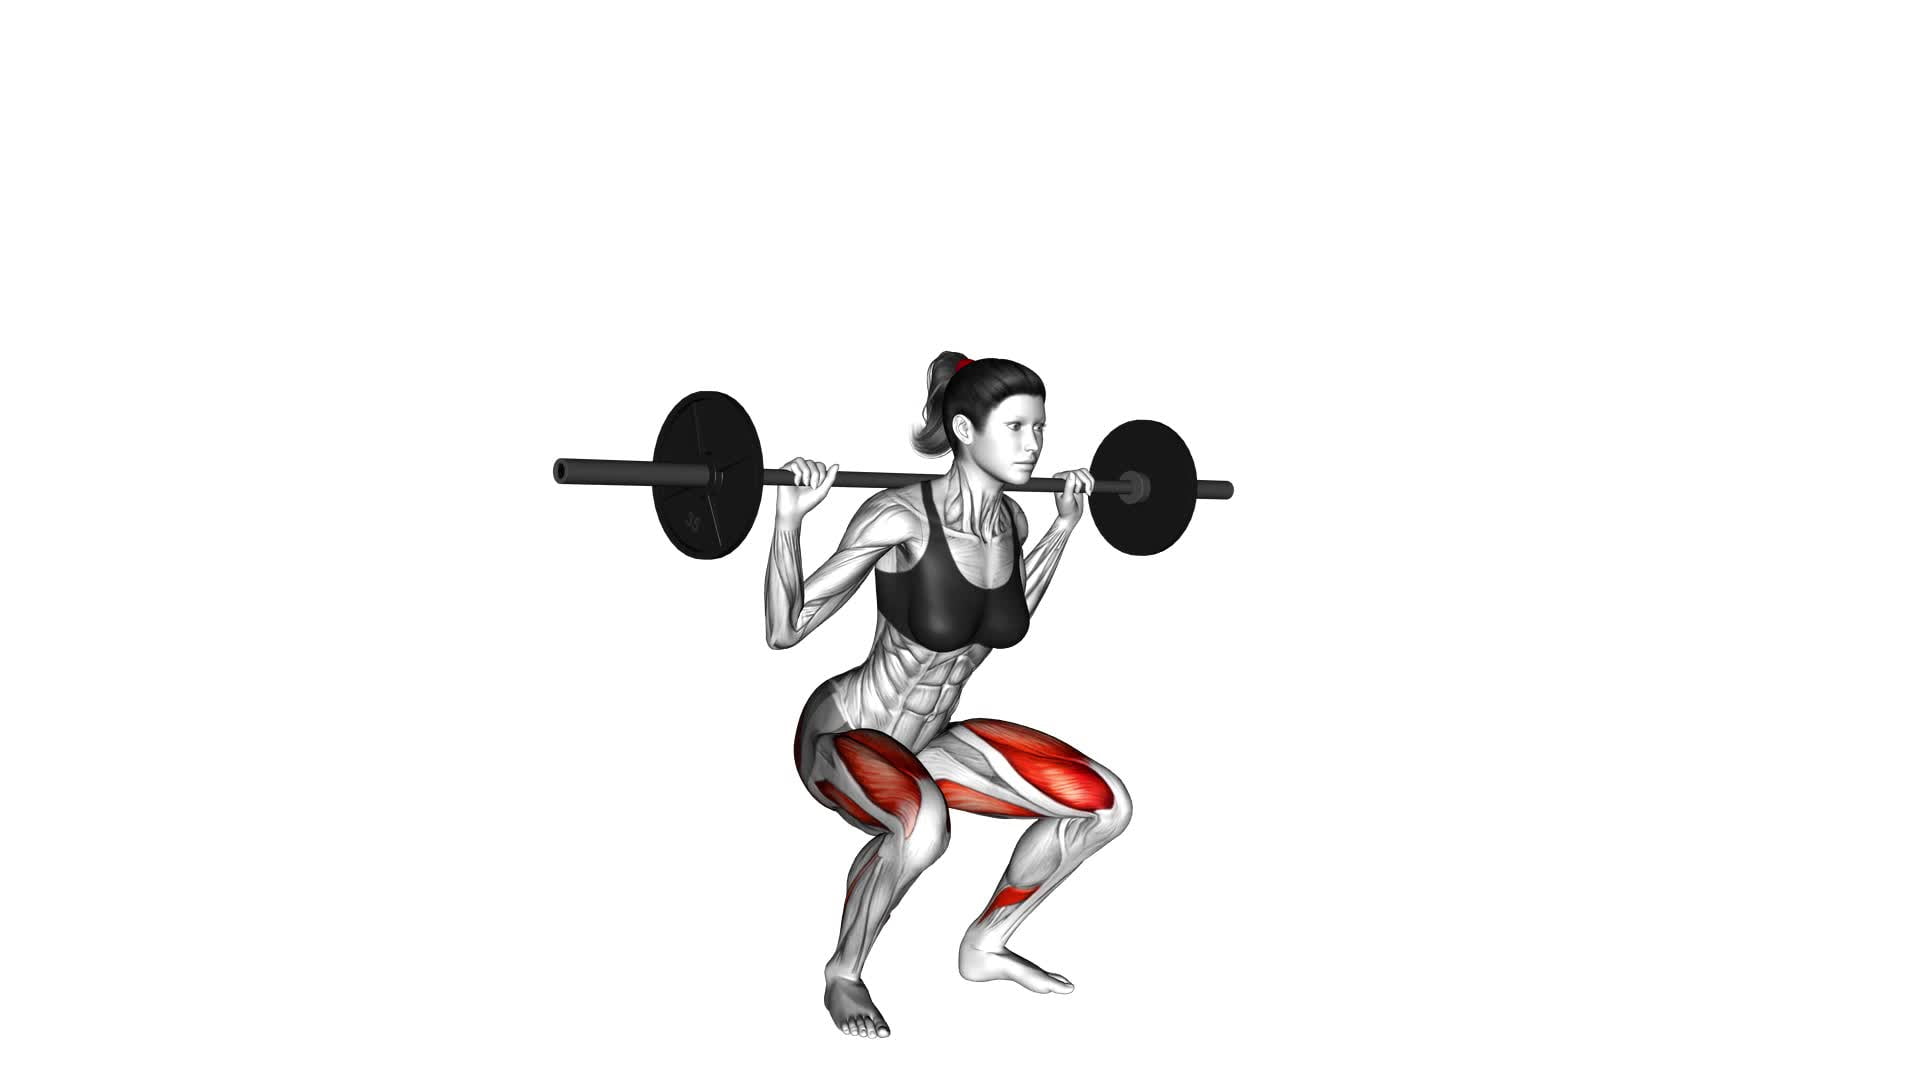 Barbell Squat (female) - Video Exercise Guide & Tips